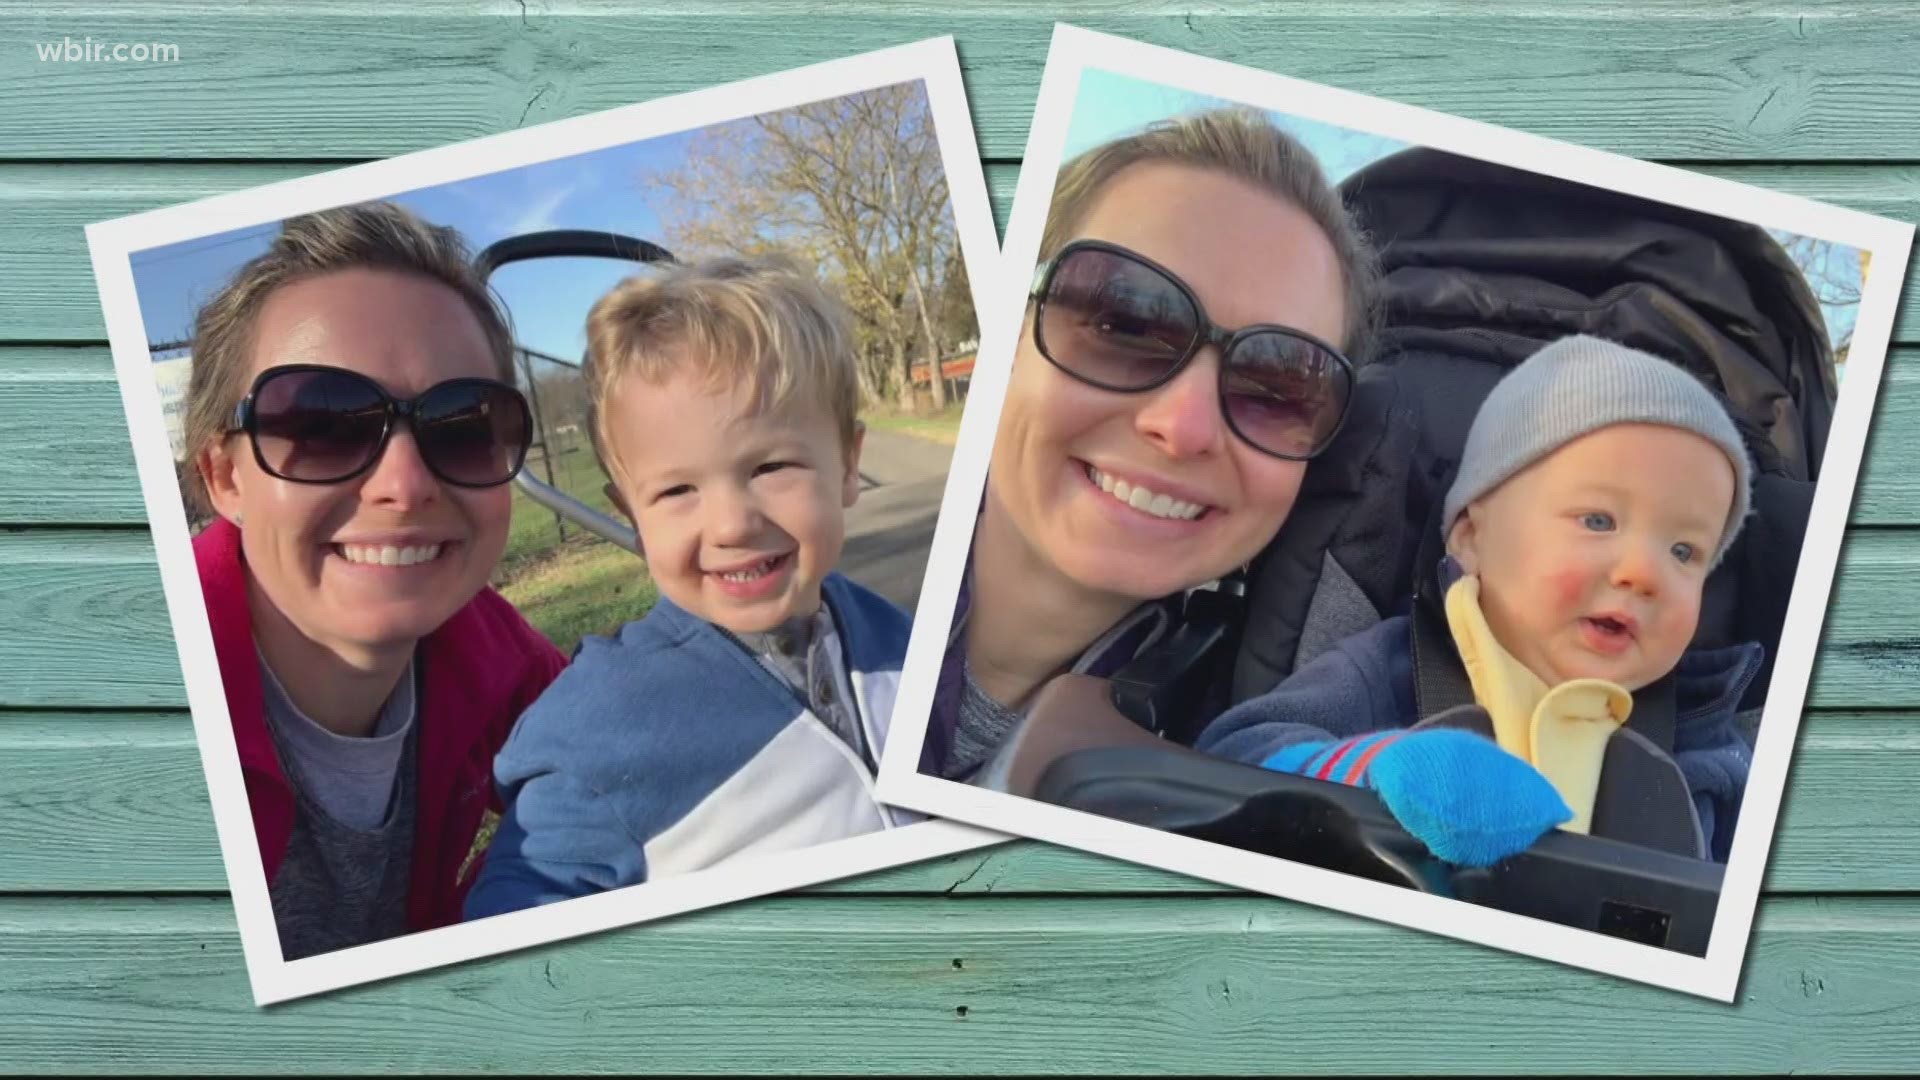 10News reporter Katie Inman spoke to one new mom raising a toddler and newborn.